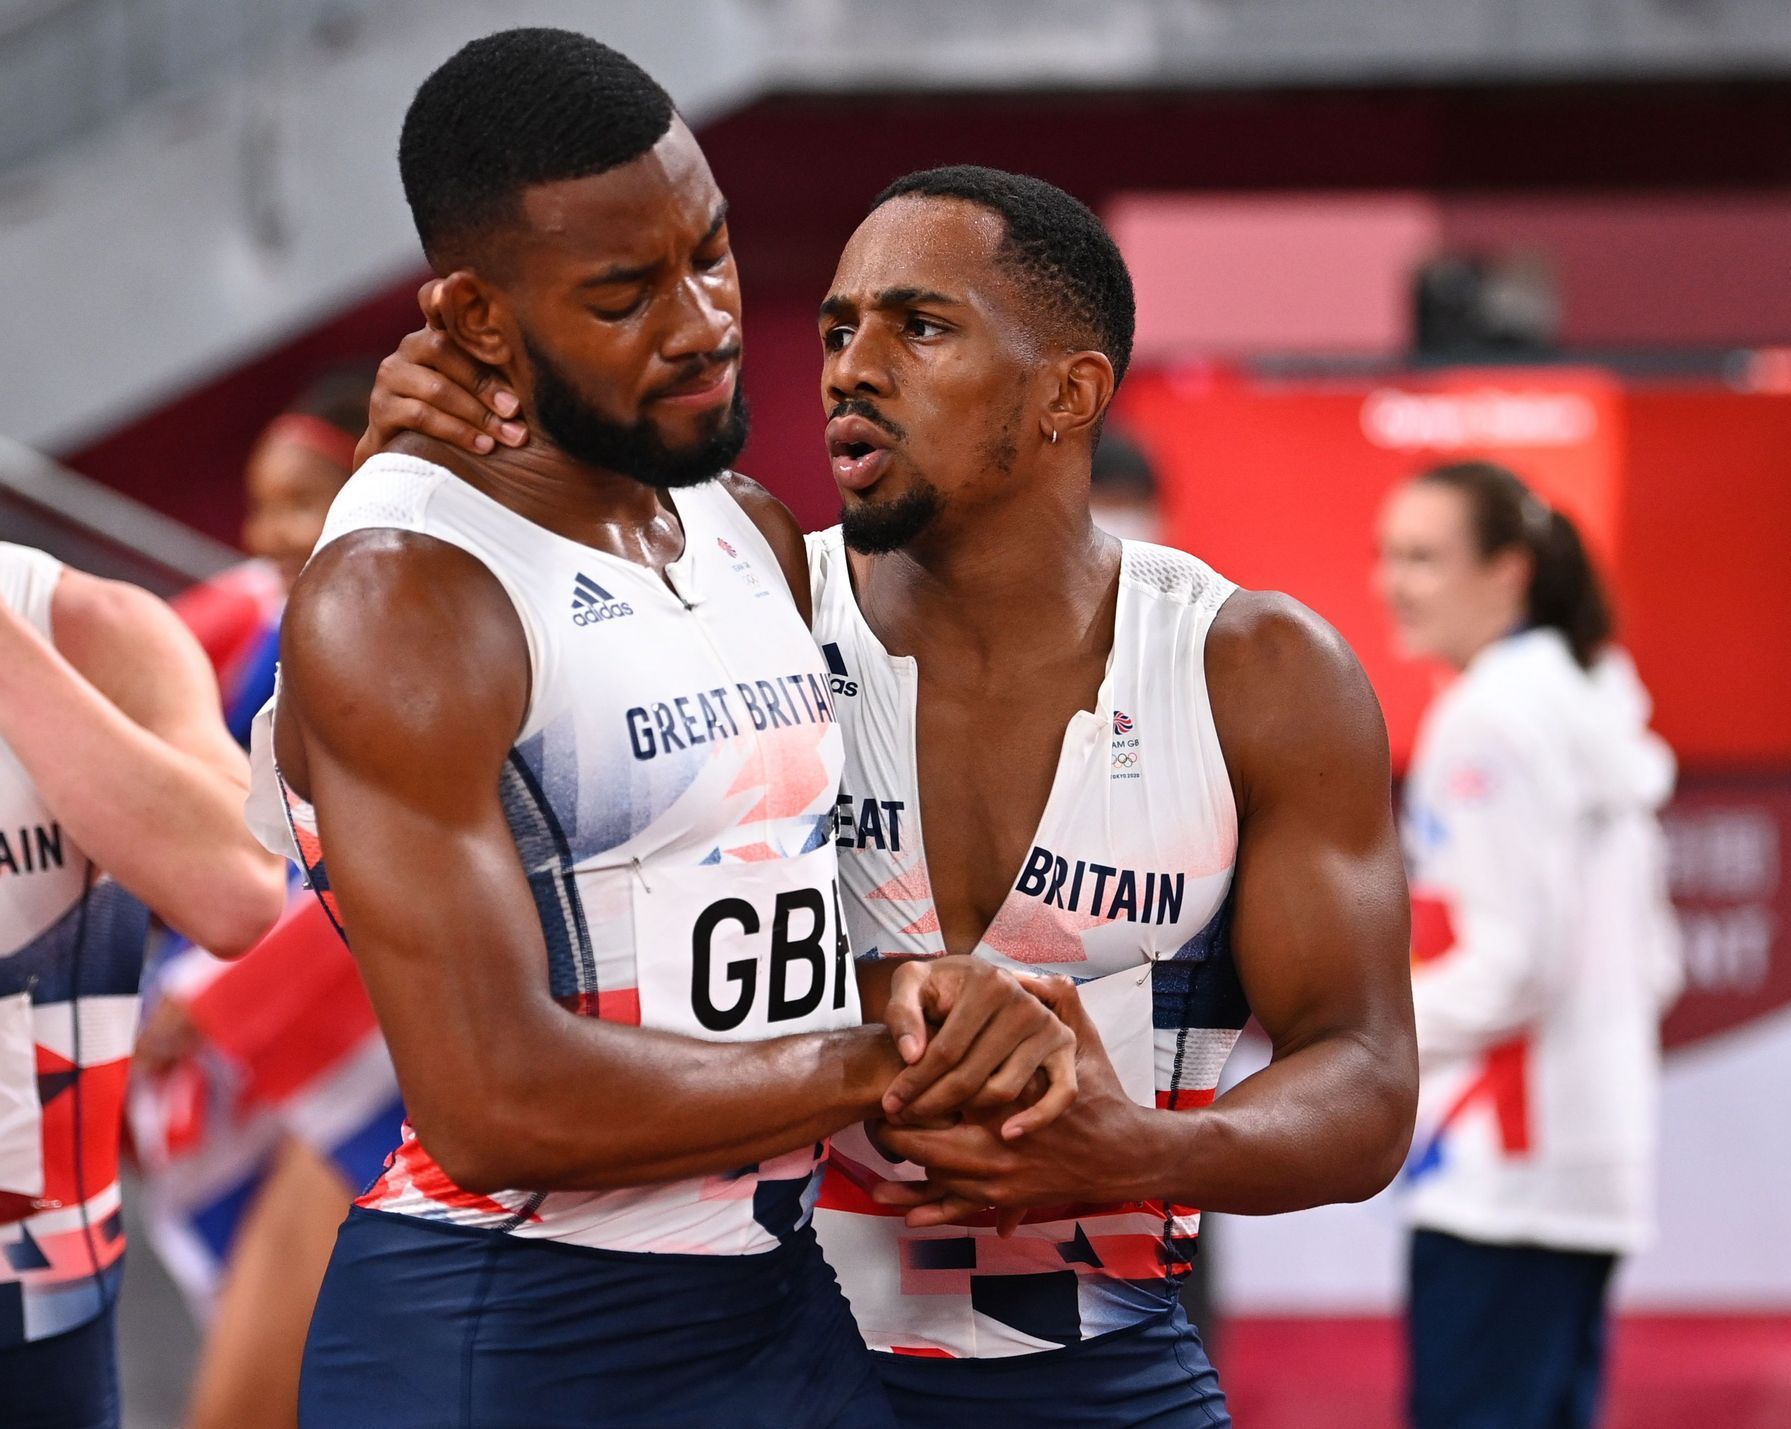 Nethaneel Mitchell-Blake of Britain is consoled by Chijindu Ujah of Britain after winning silver